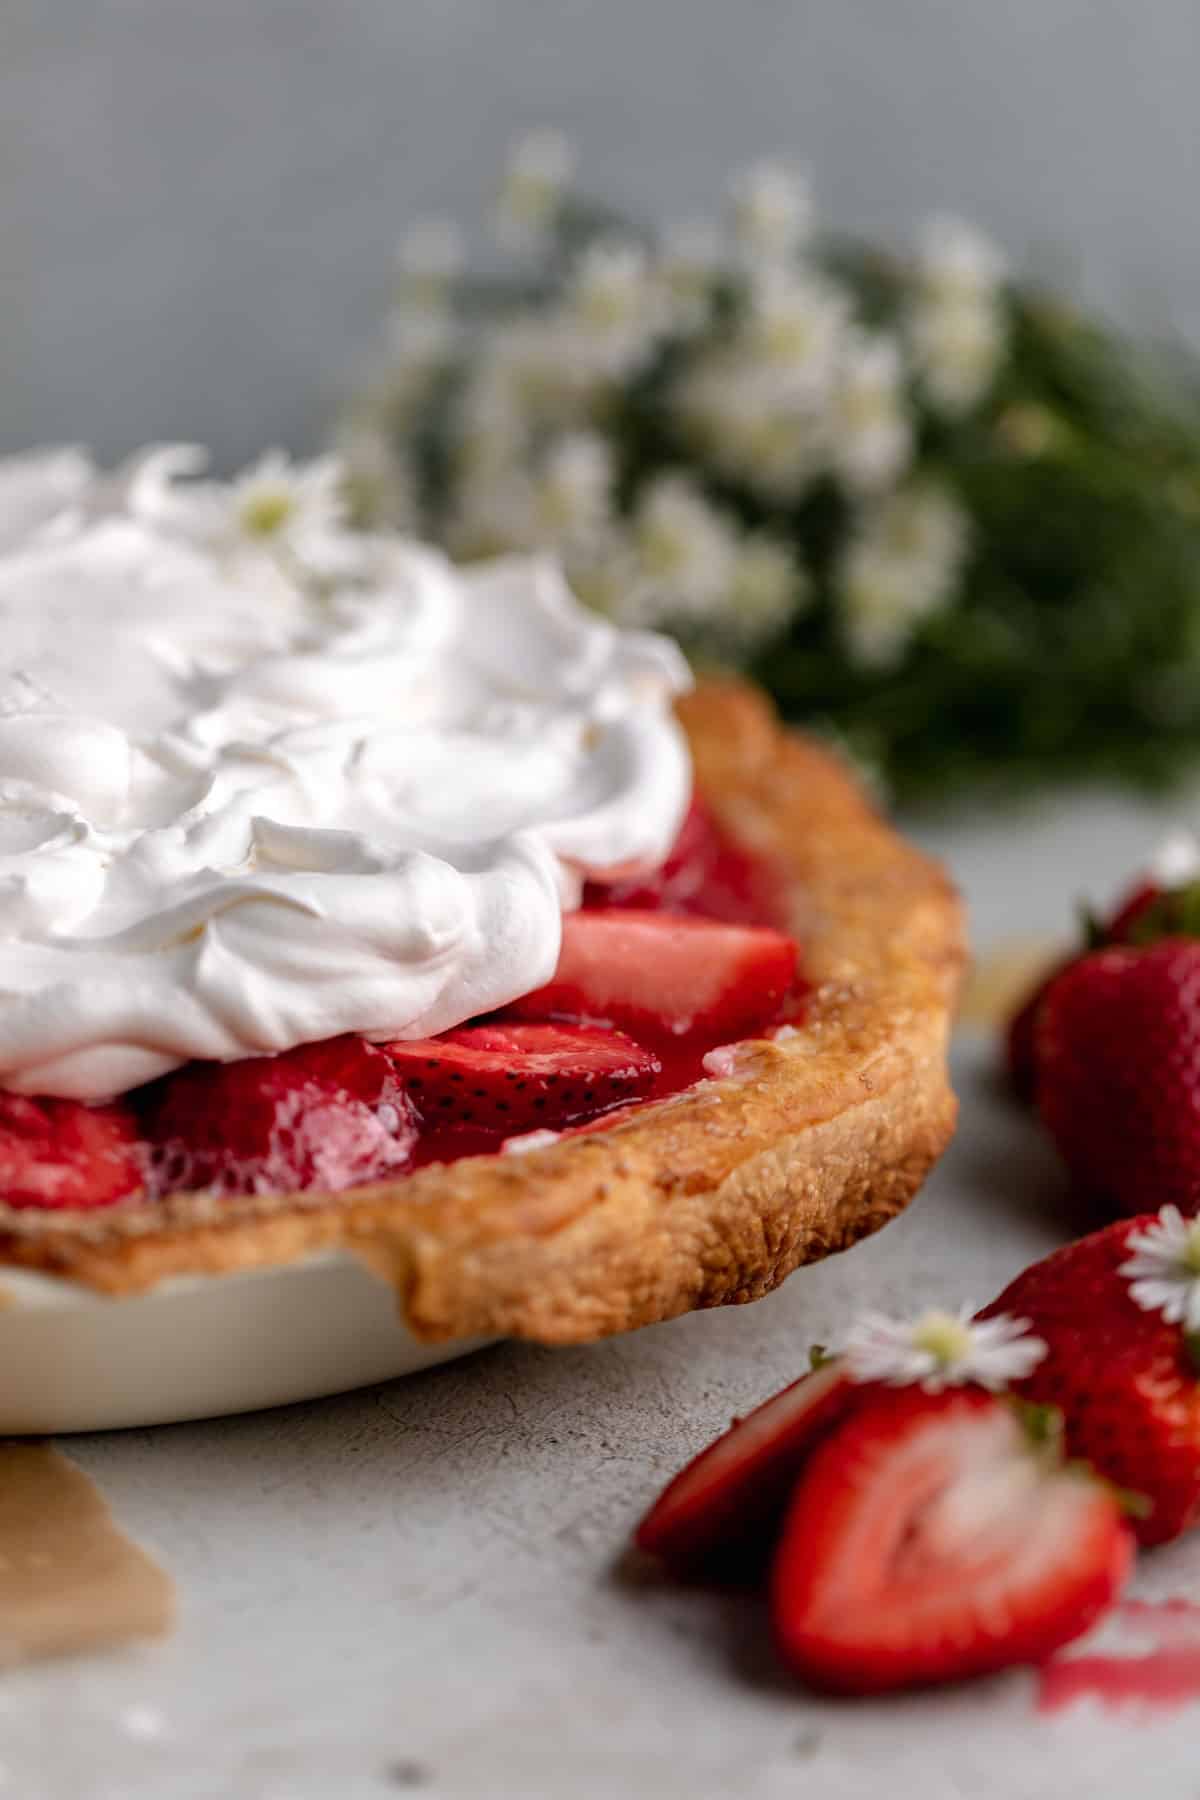 Strawberry Cream Cheese Pie with Jell-O, topped with whipped cream.